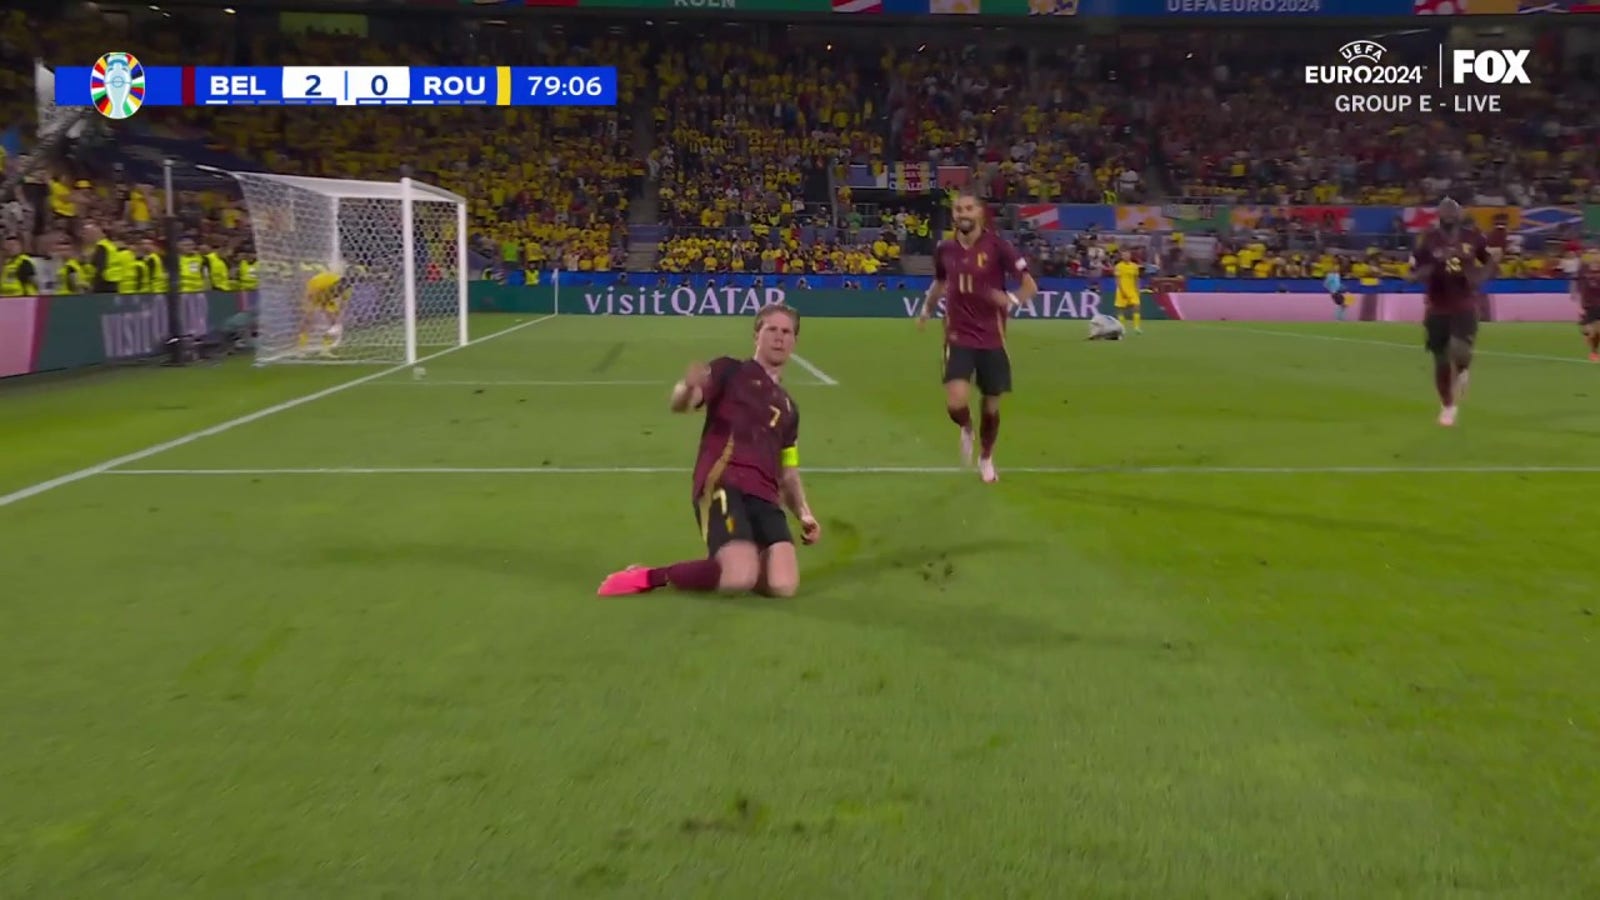 Kevin De Bruyne slots in a goal in 80' to give Belgium a 2-0 lead over Romania | UEFA Euro 2024